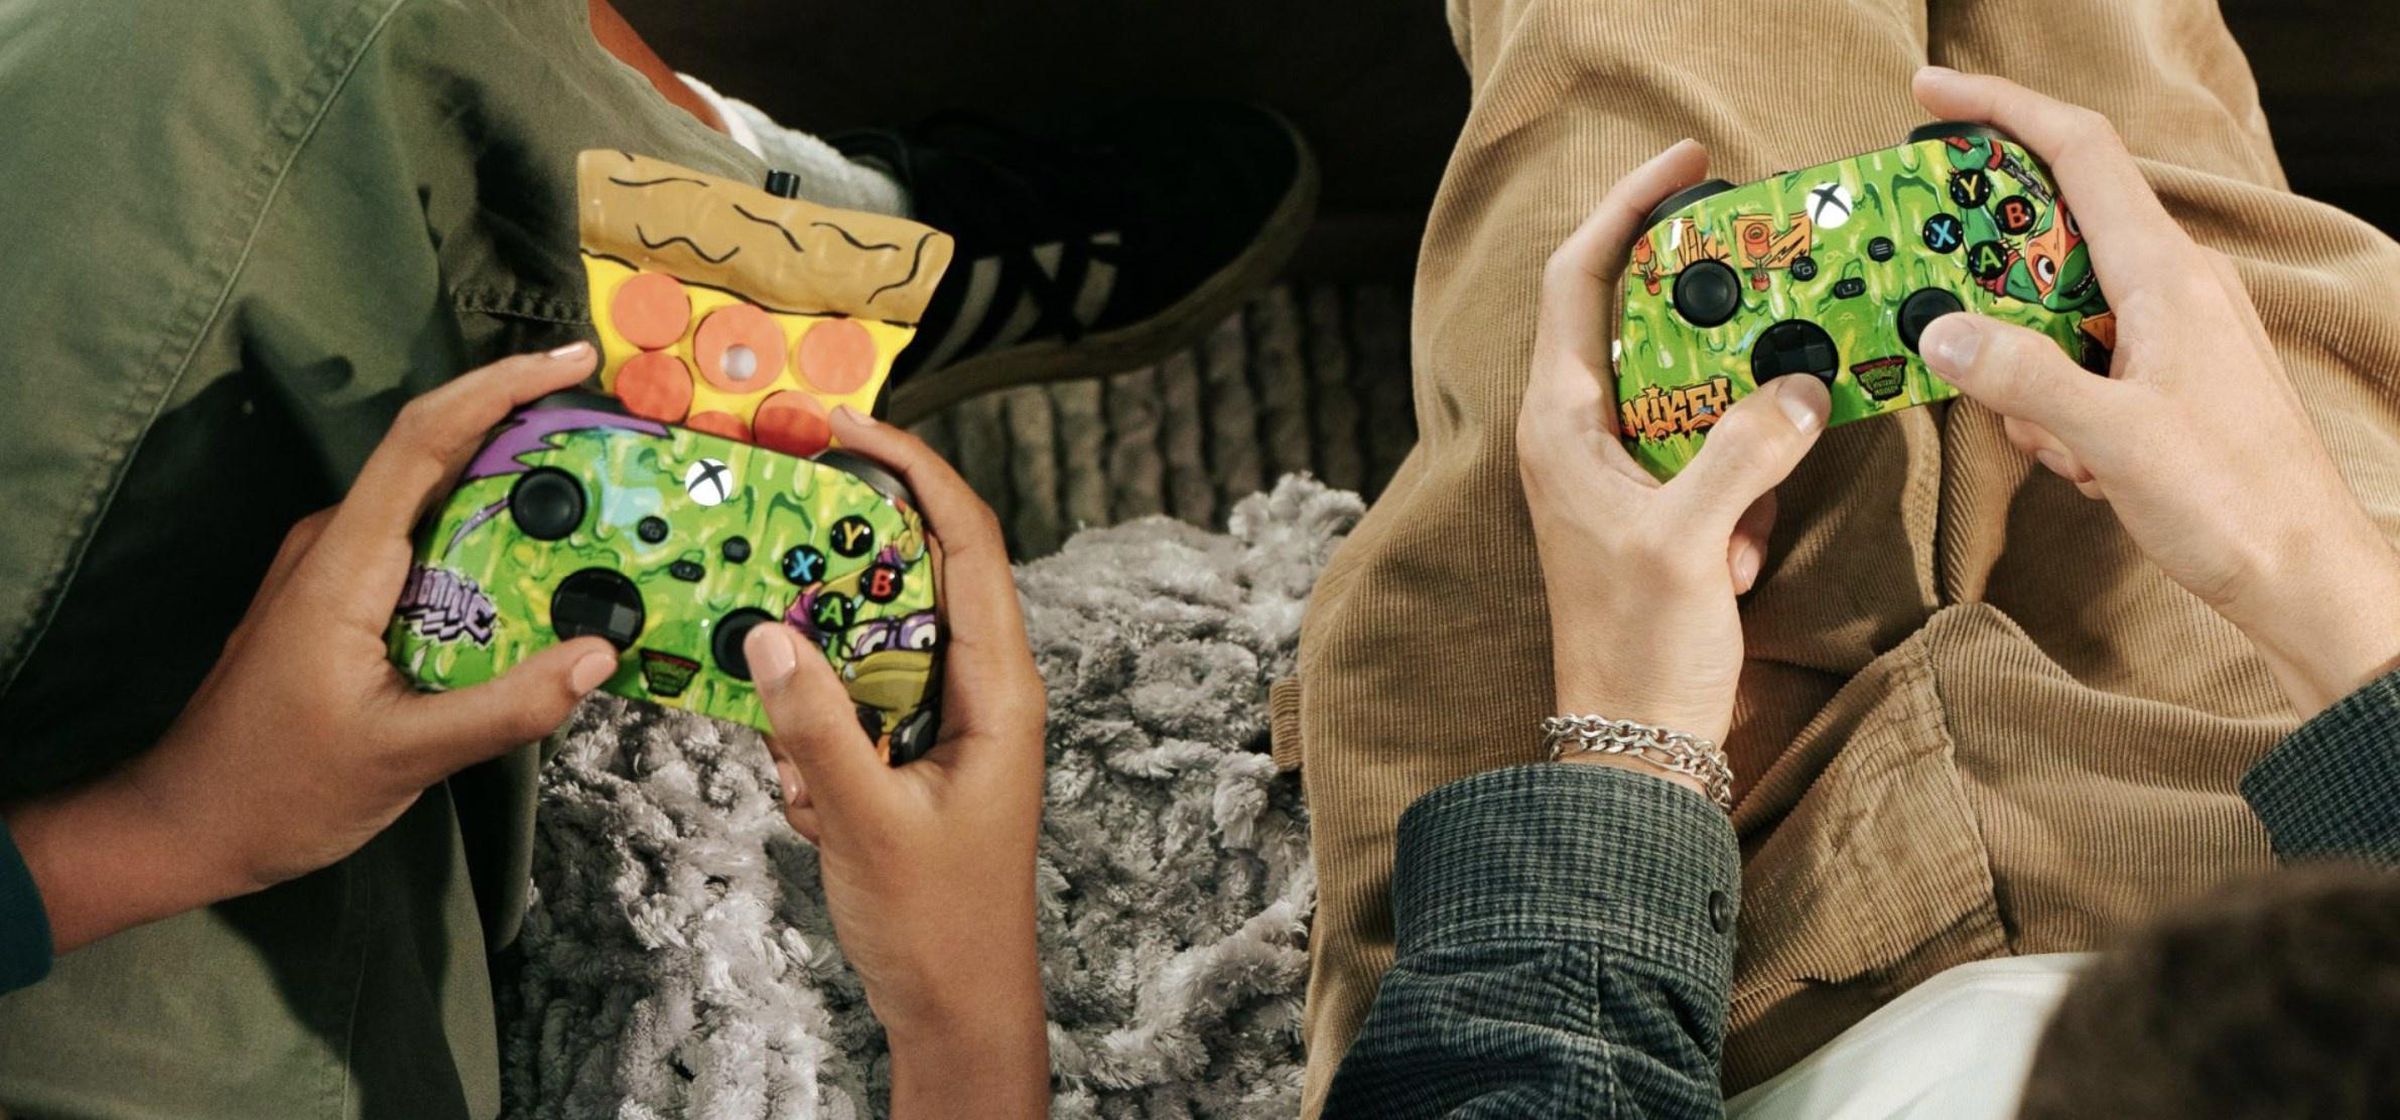 The custom pizza-scented Xbox controllers.